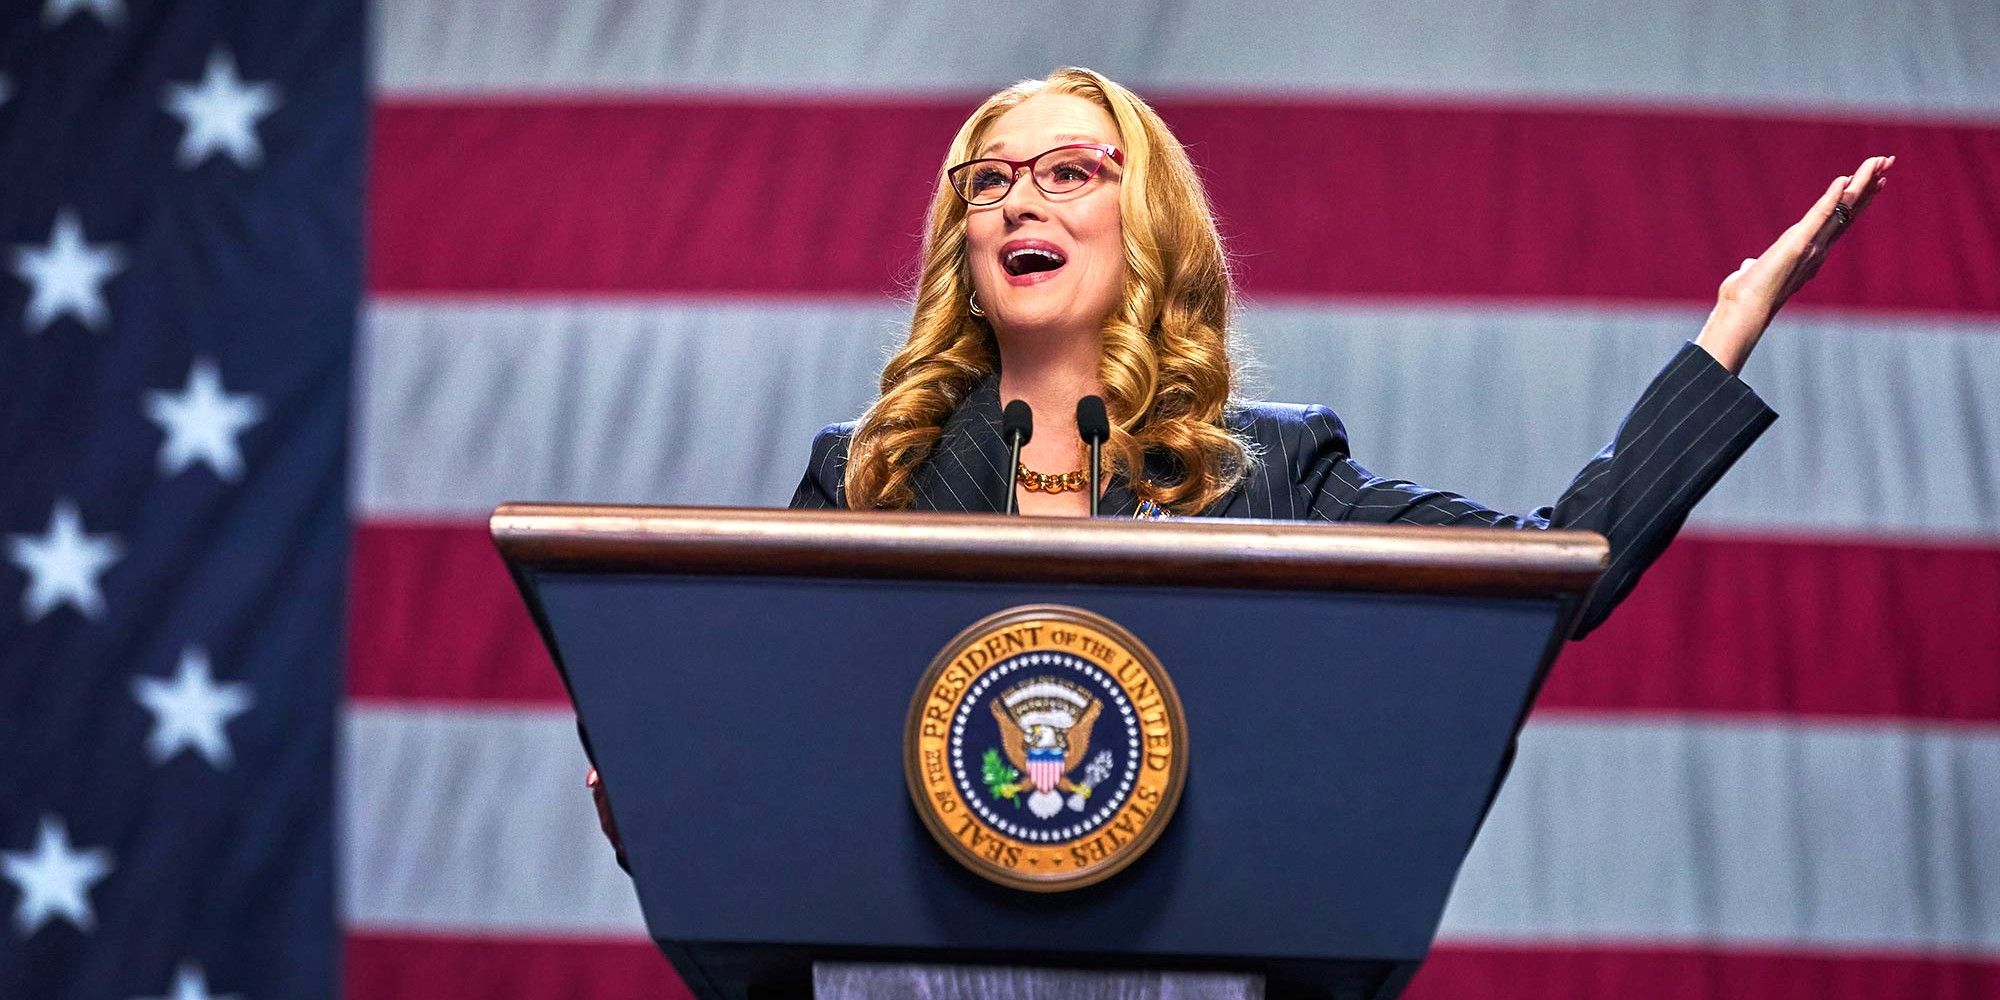 Meryl Streep as President Orlean at the rally in Don't Look Up